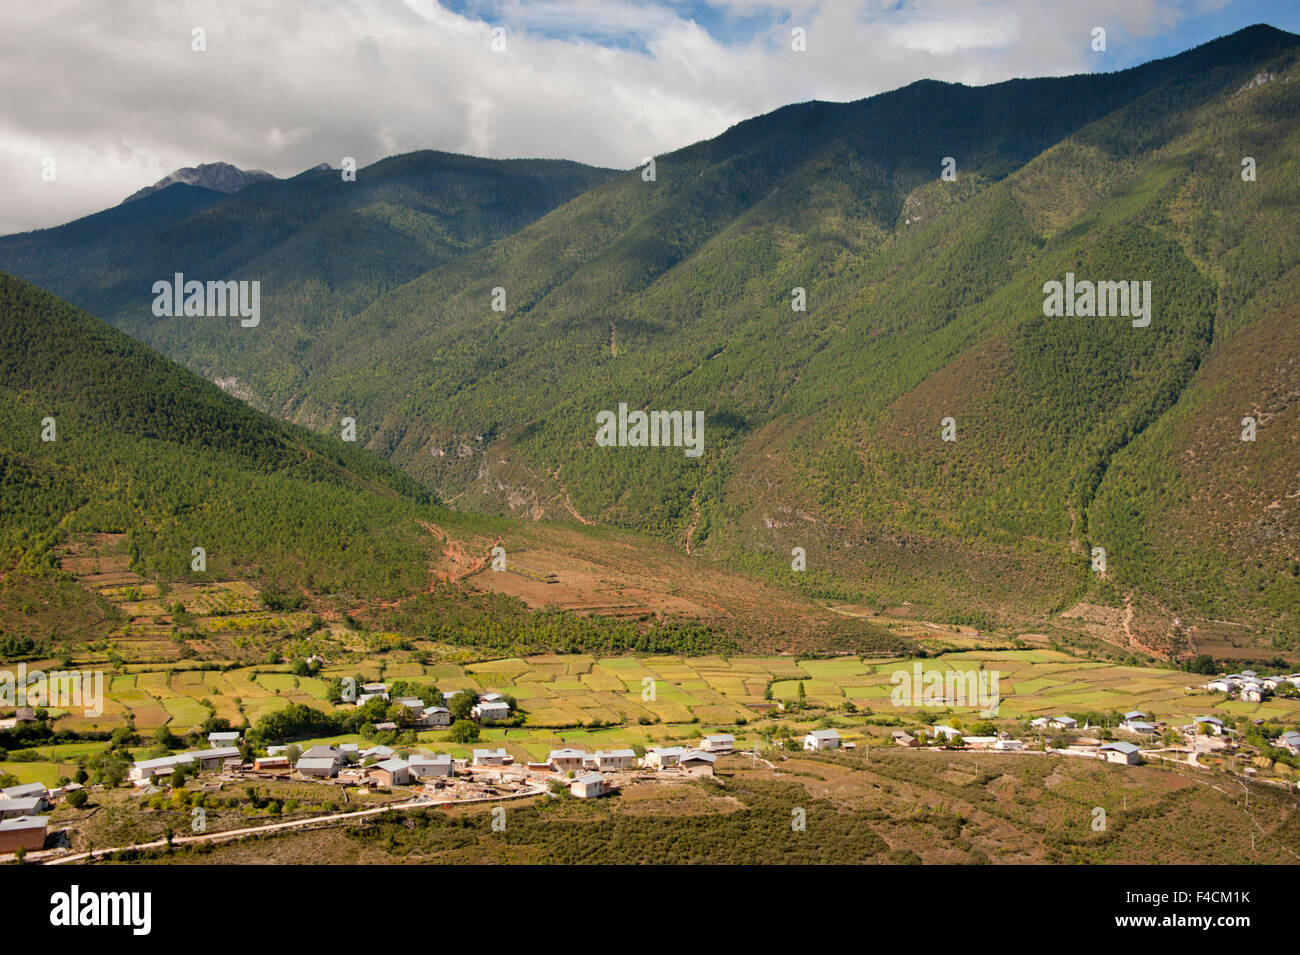 China, Yunnan, Guo Dao 214. Nixi village surrounded by agricultural fields seen from National Highway 214. Stock Photo